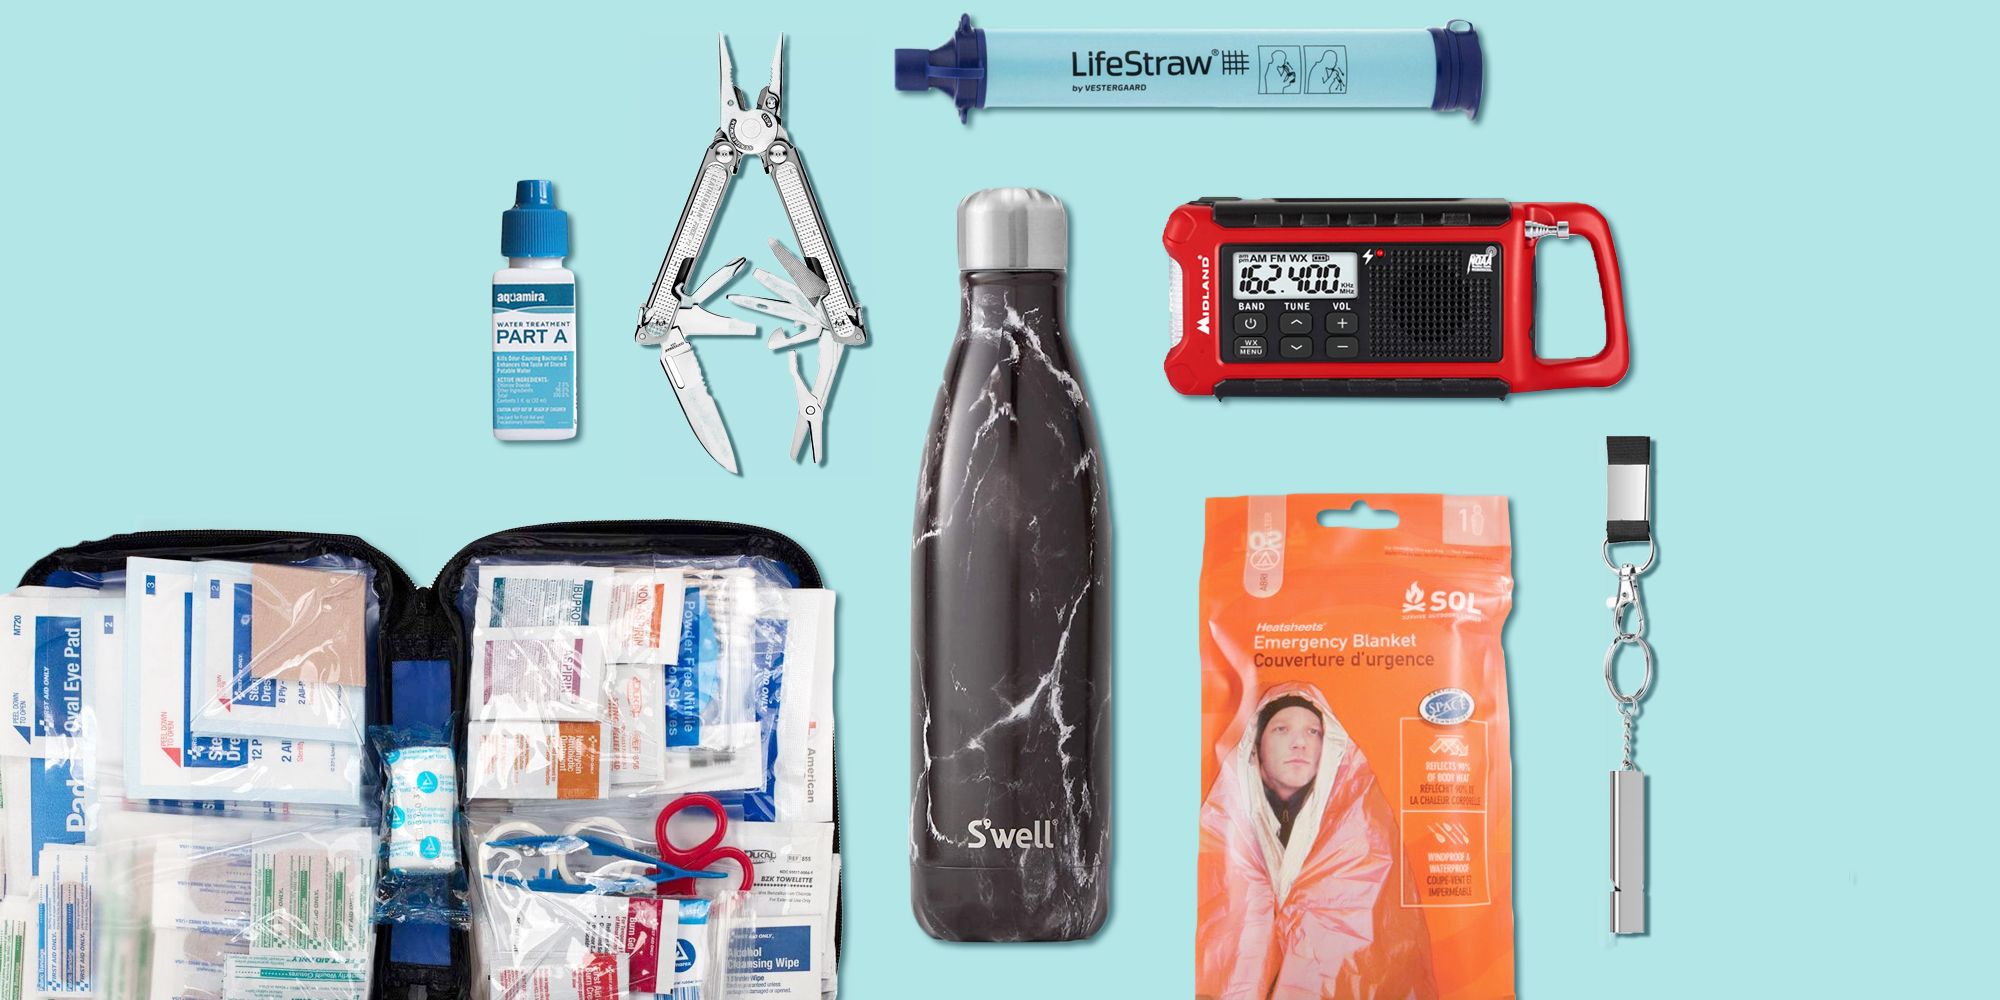 Essential Tips for Creating an Emergency Survival Kit